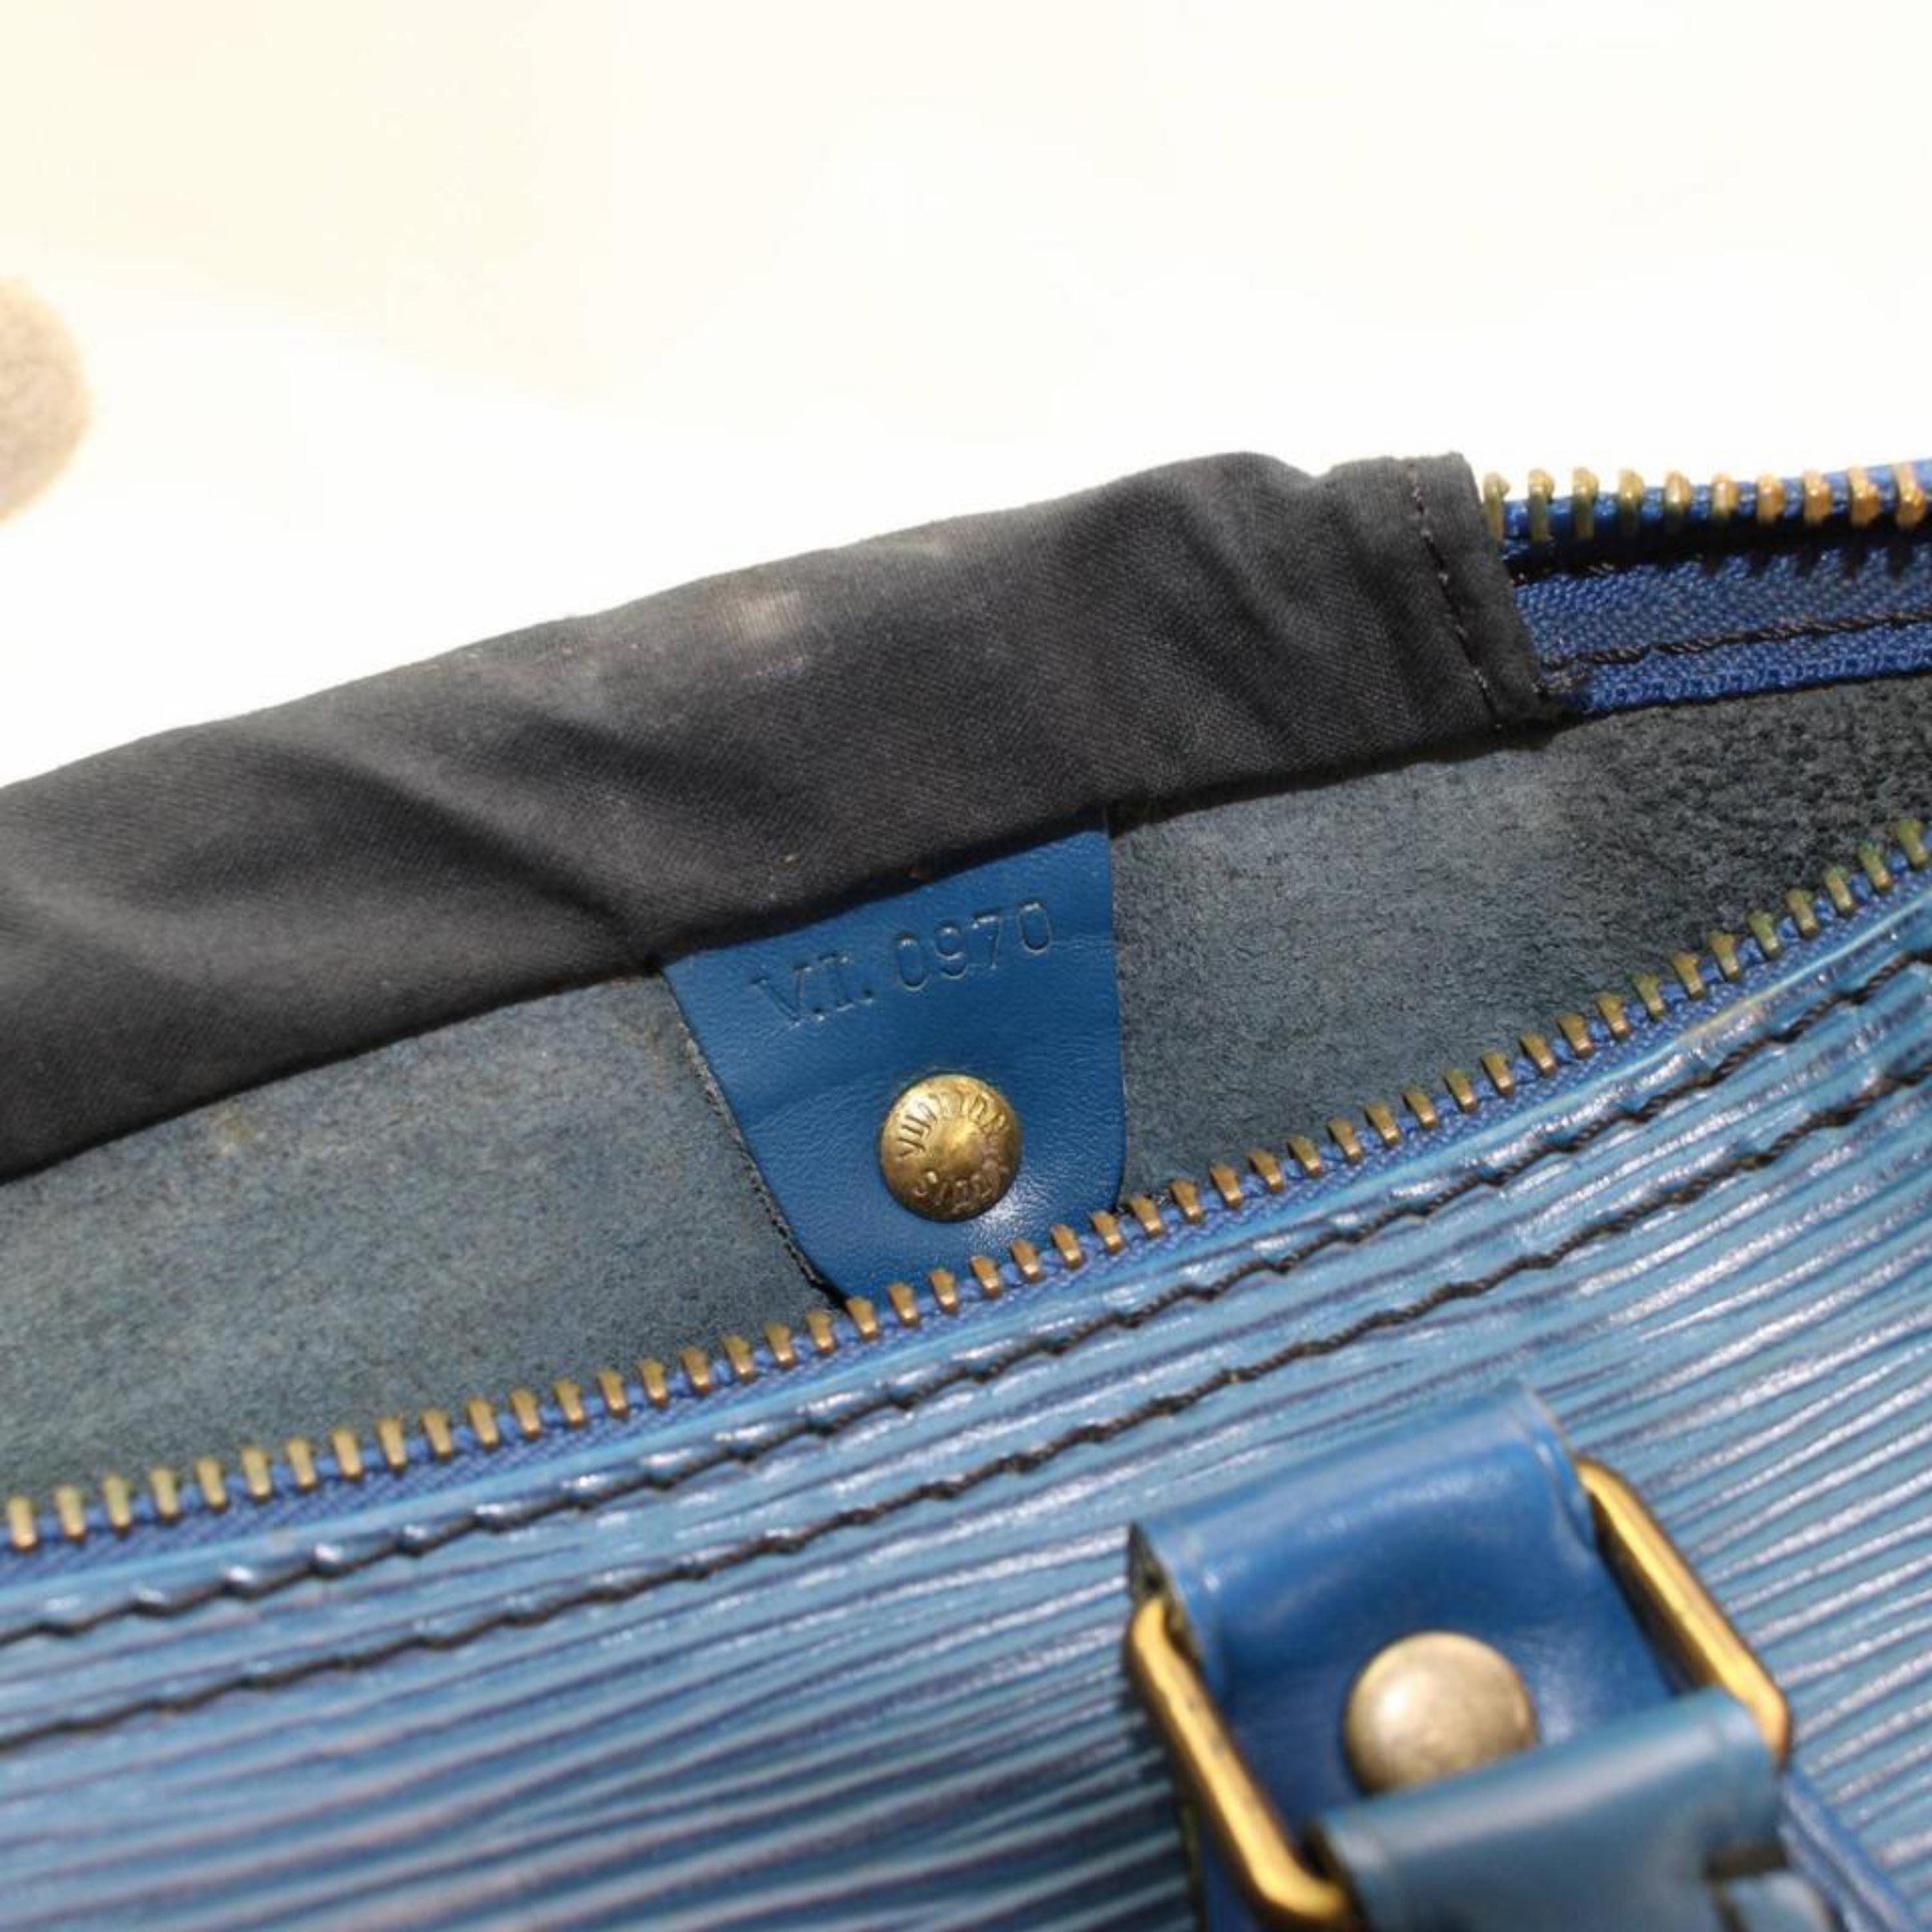 Louis Vuitton Speedy Epi 25 868003 Blue Leather Satchel In Good Condition For Sale In Forest Hills, NY